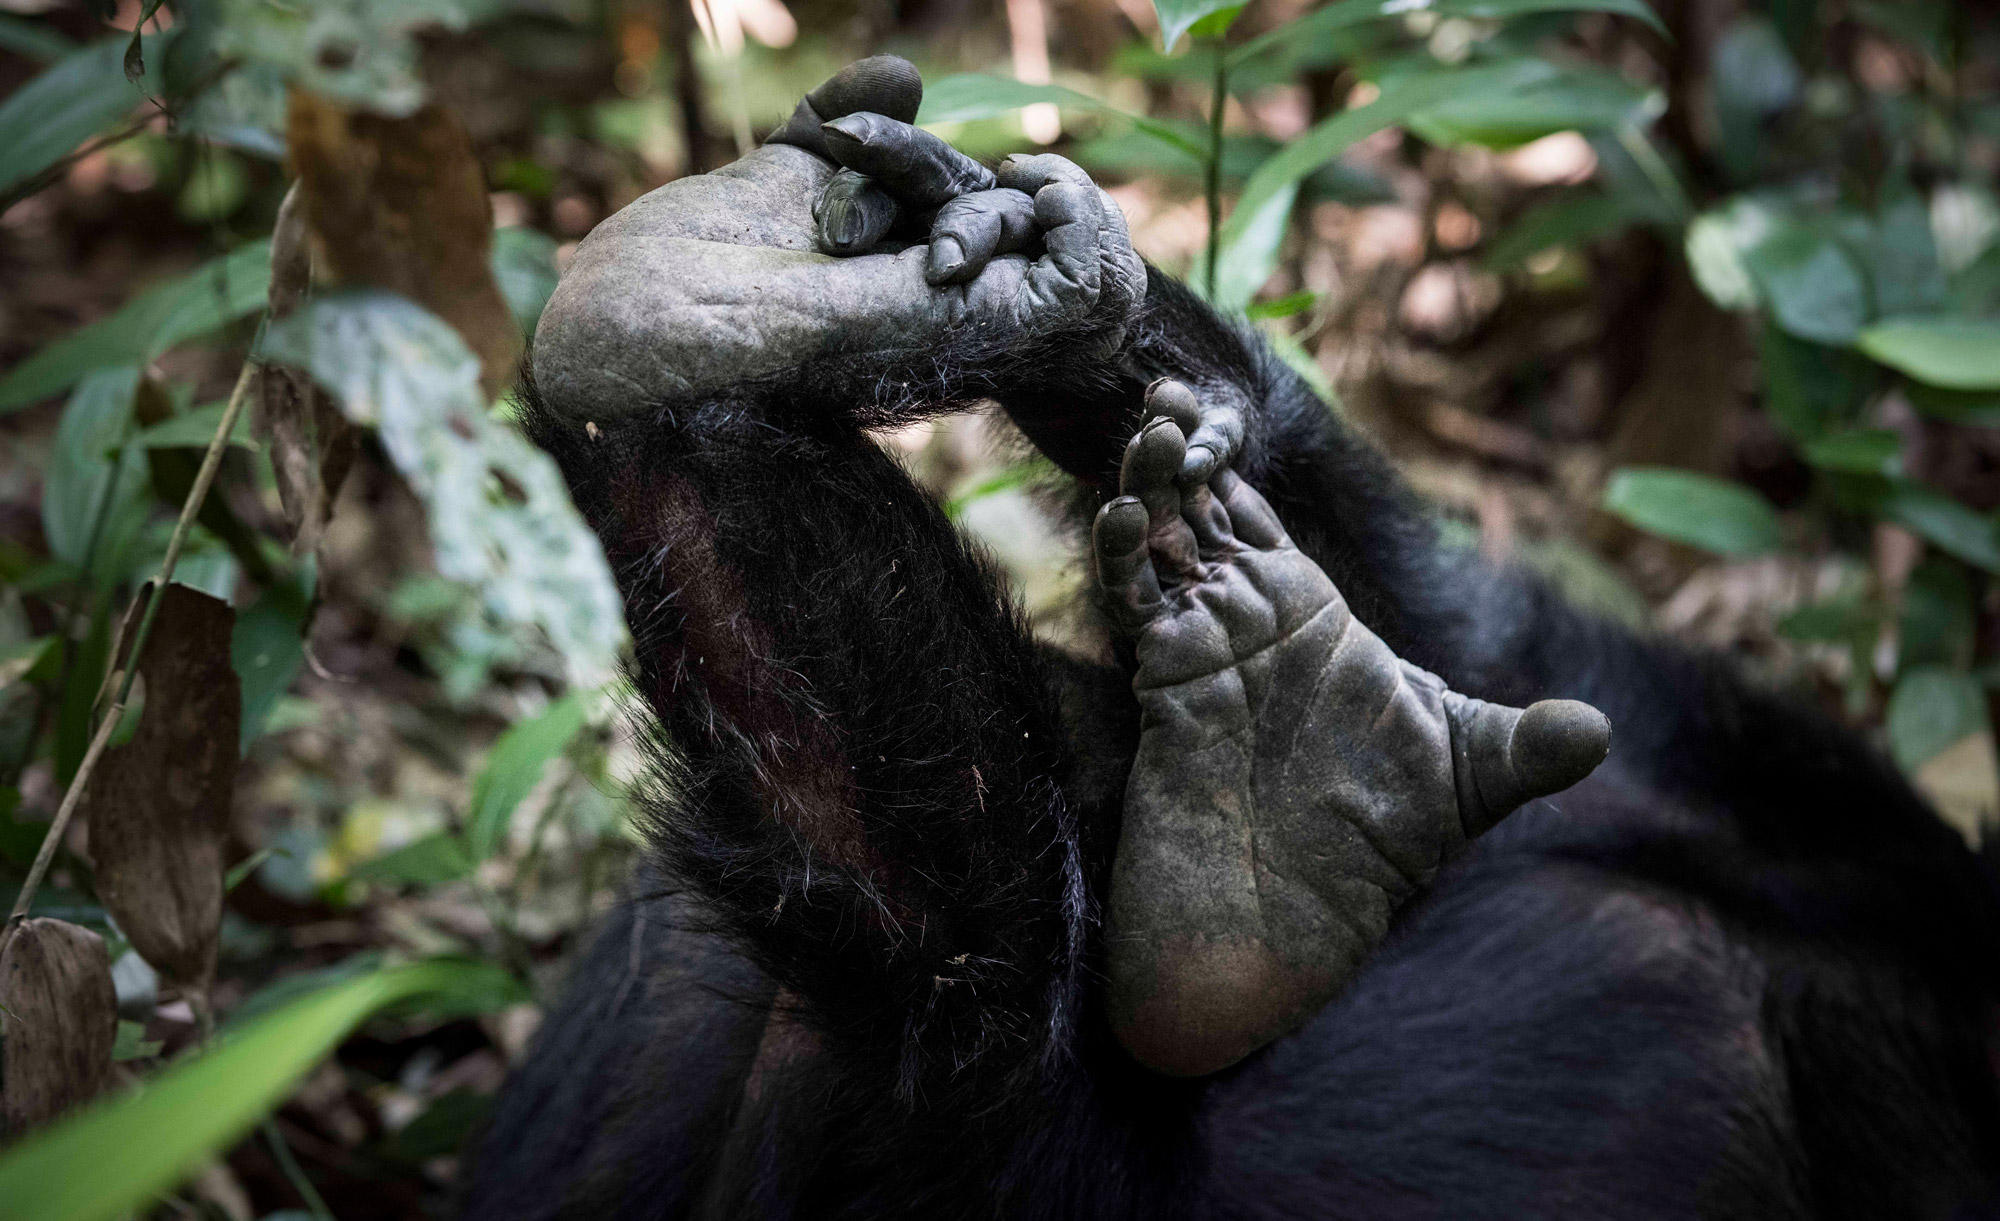 The feet of a chimpanzee in Kibale Forest National Park, Uganda © Andrea Galli